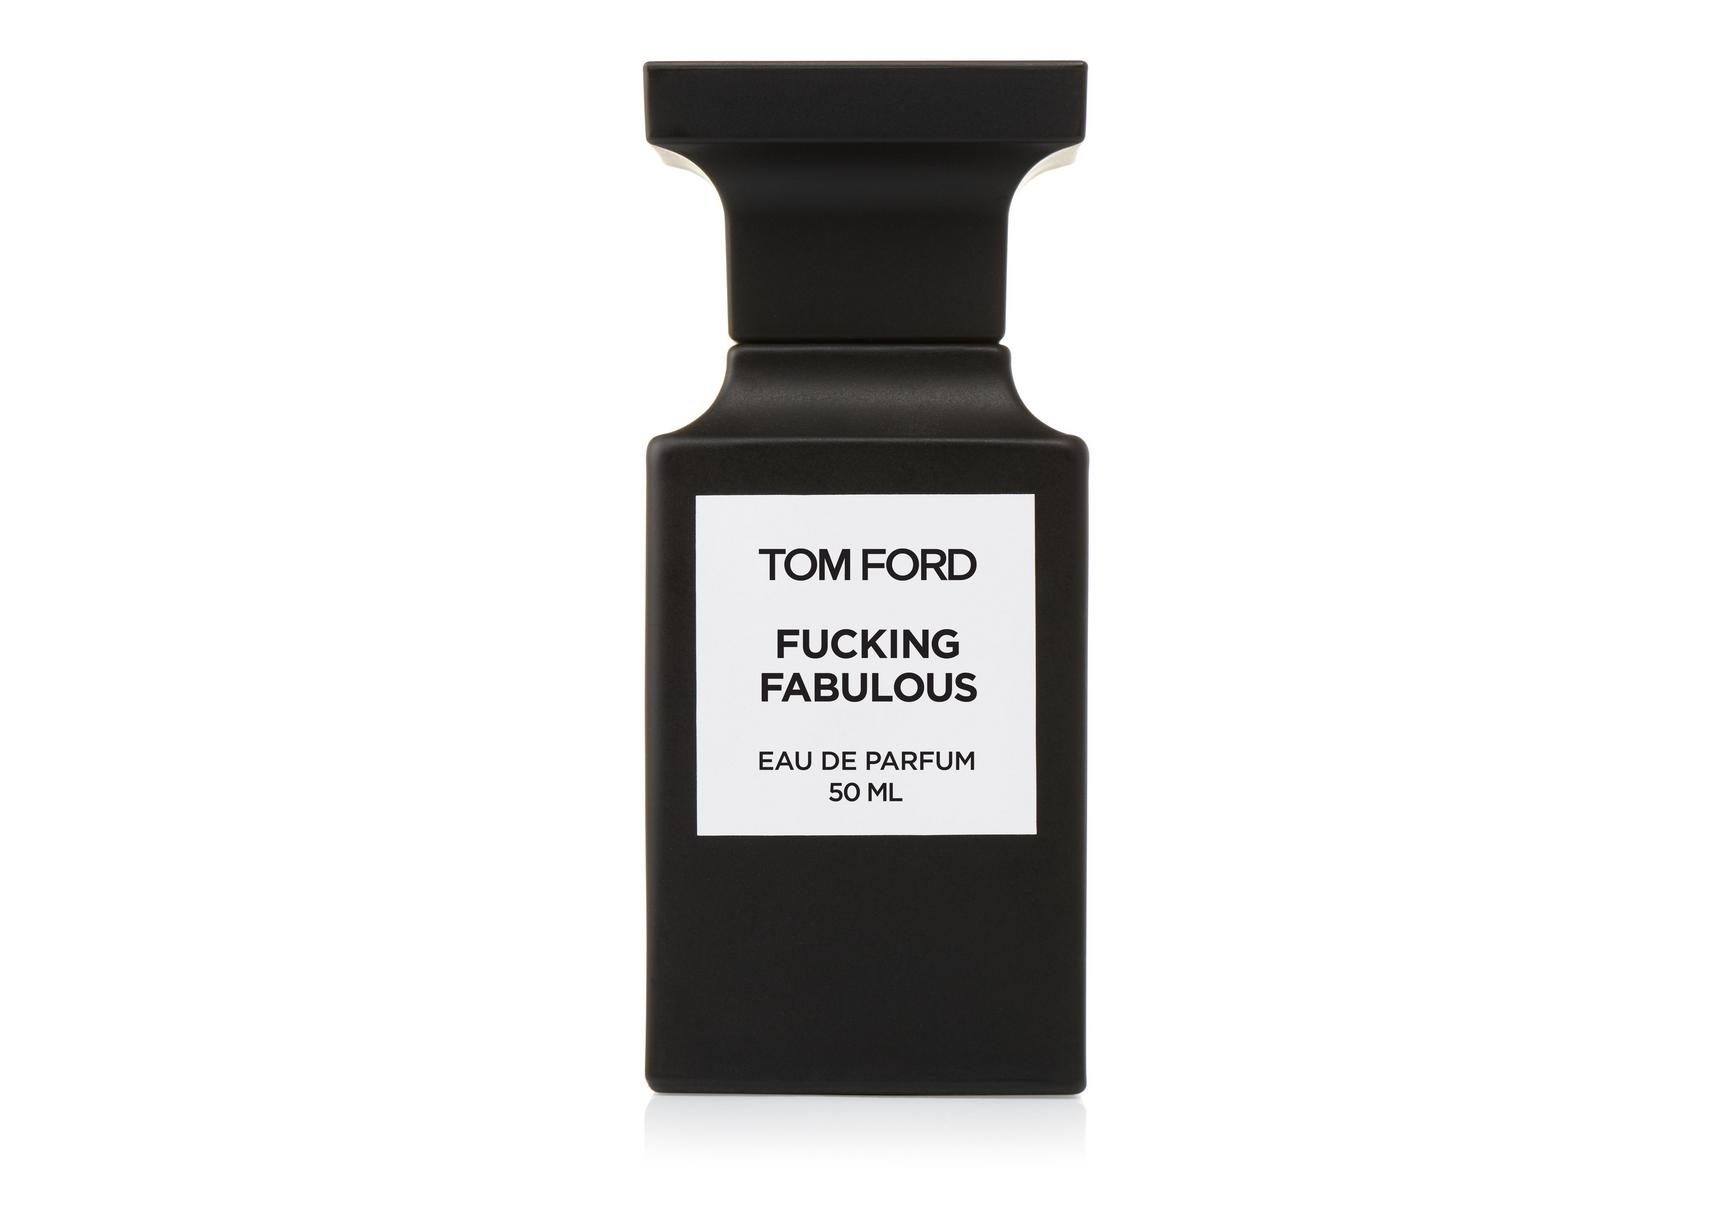 SUPER SCENT. Tom Ford Fucking Fabulous fragrance. Photo from tomford.com 